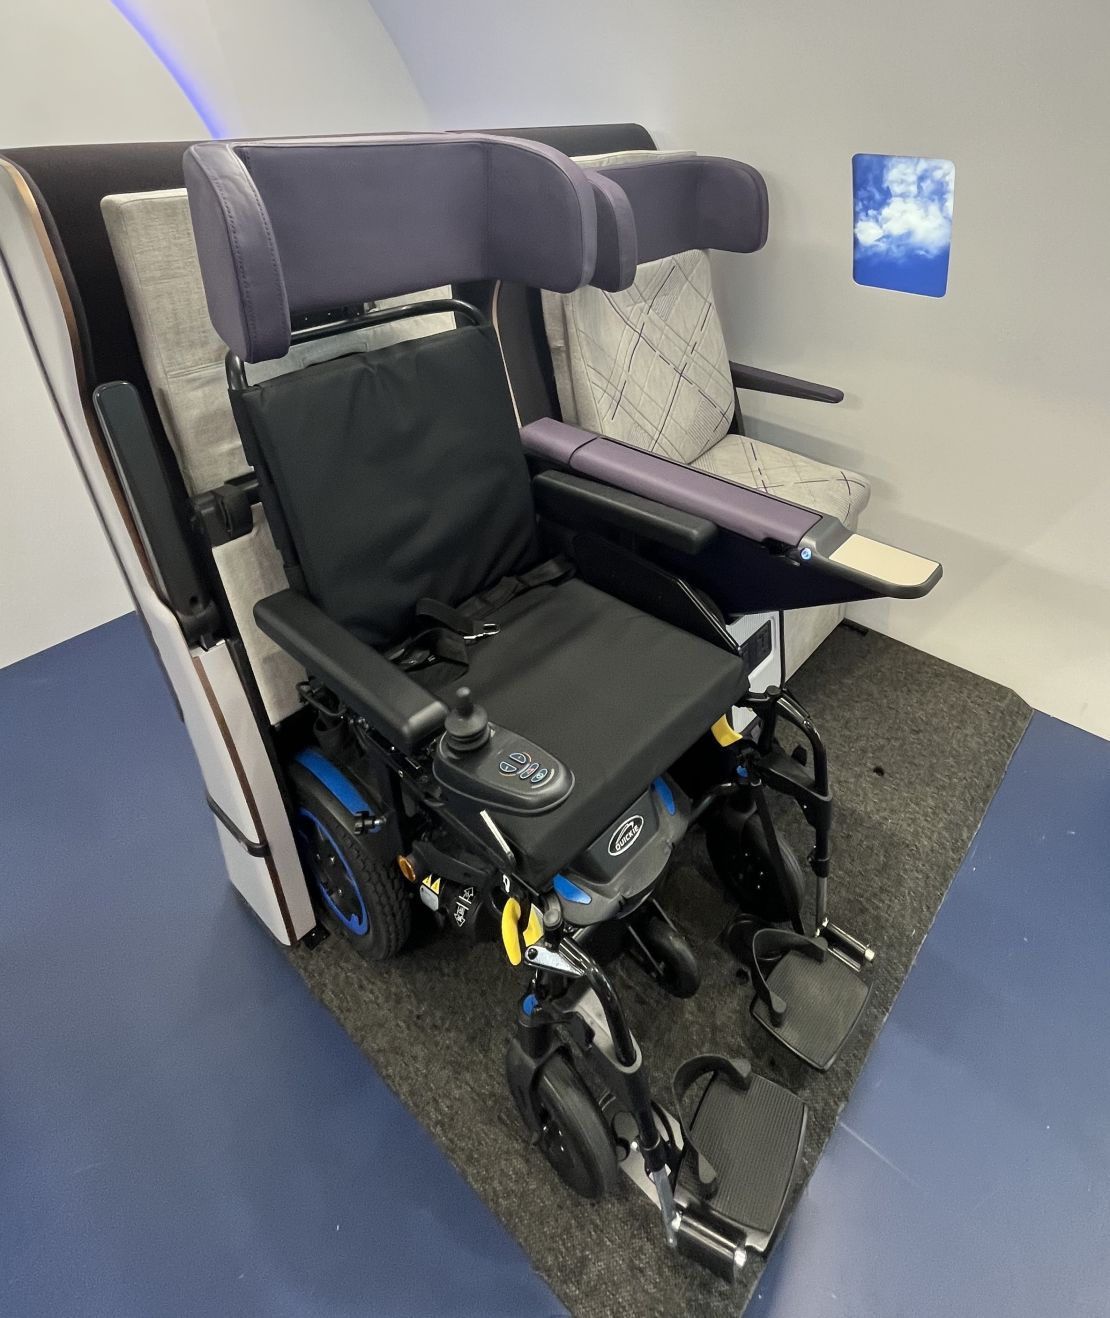 Here's the seat prototype in its wheelchair mode on display at the Airline Interiors Expo in Hamburg, Germany.